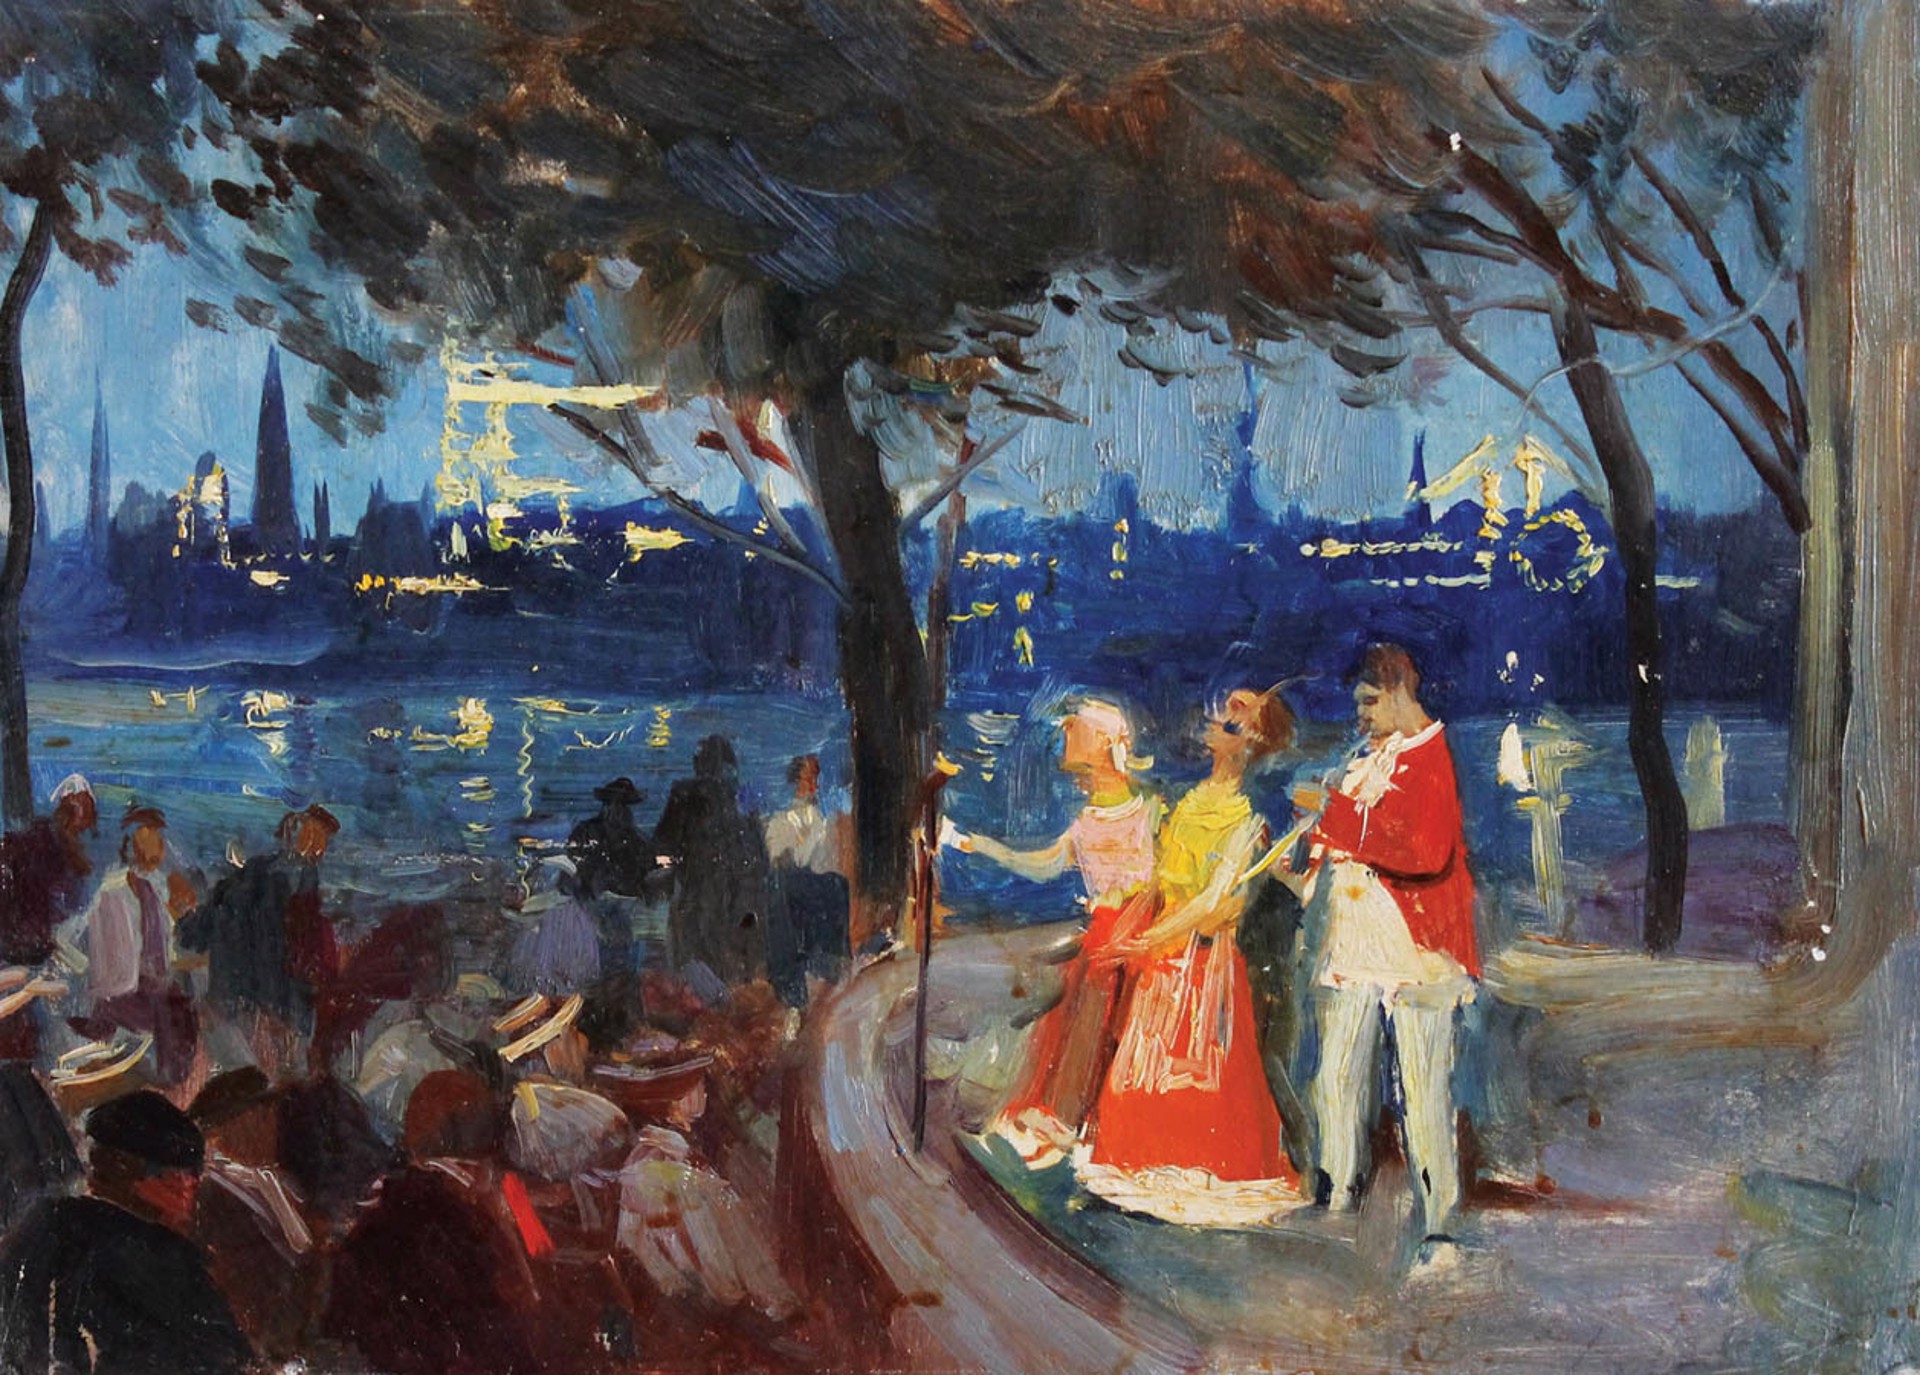 Musicians by the River by Dmitri Nalbandayan